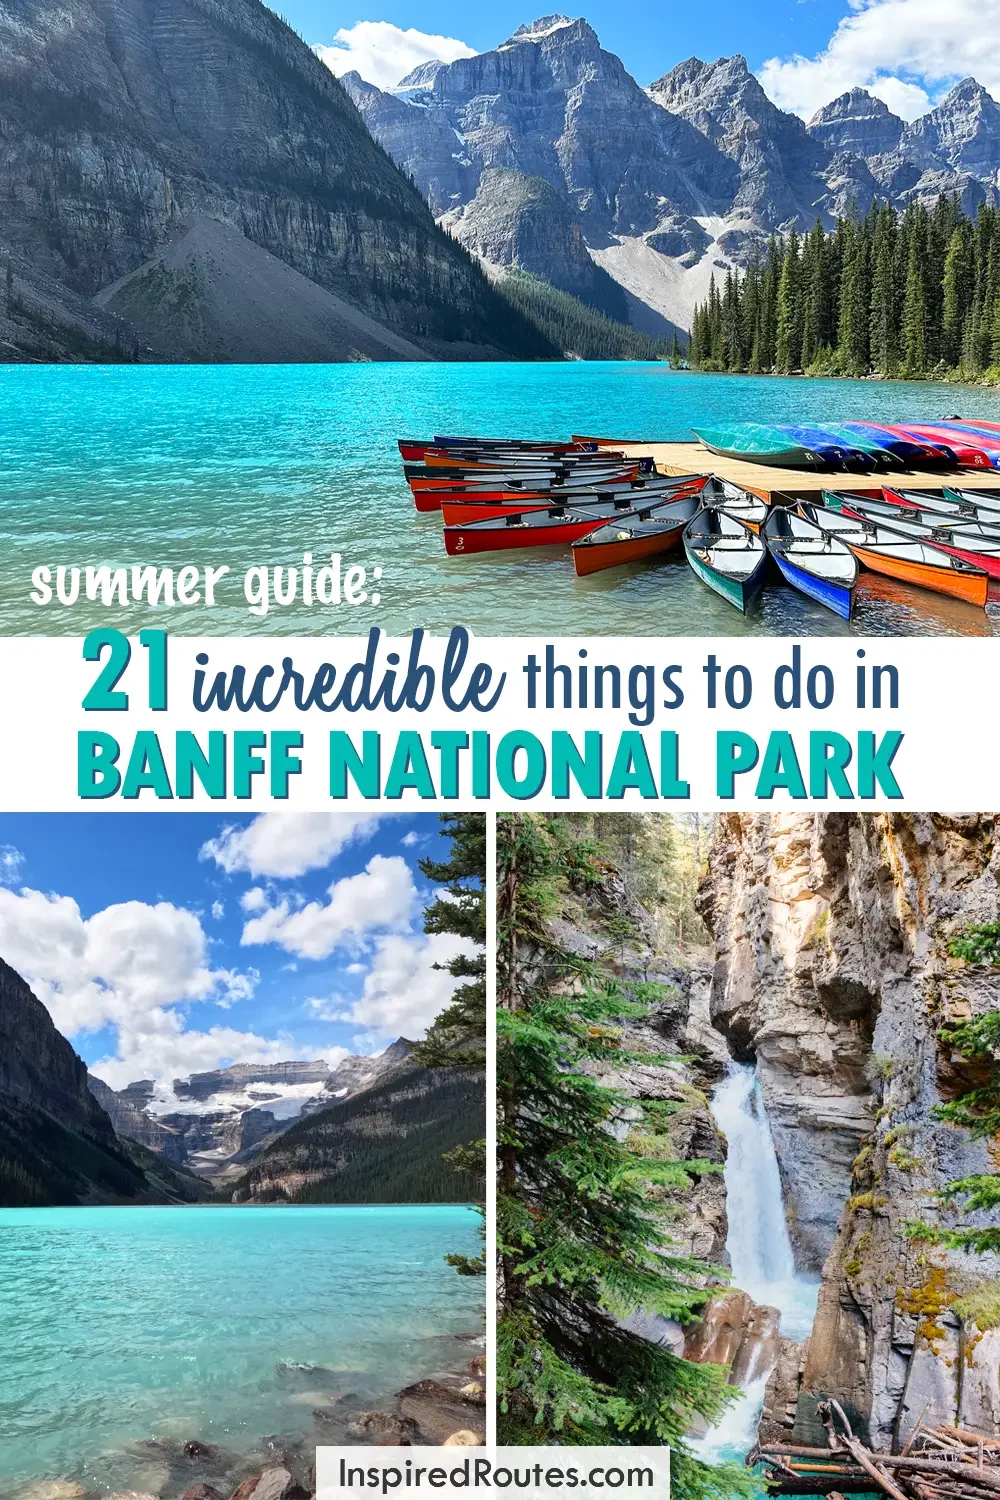 summer guide 21 incredible things to do in Banff national park with photos of mountain lake canoes and waterfall